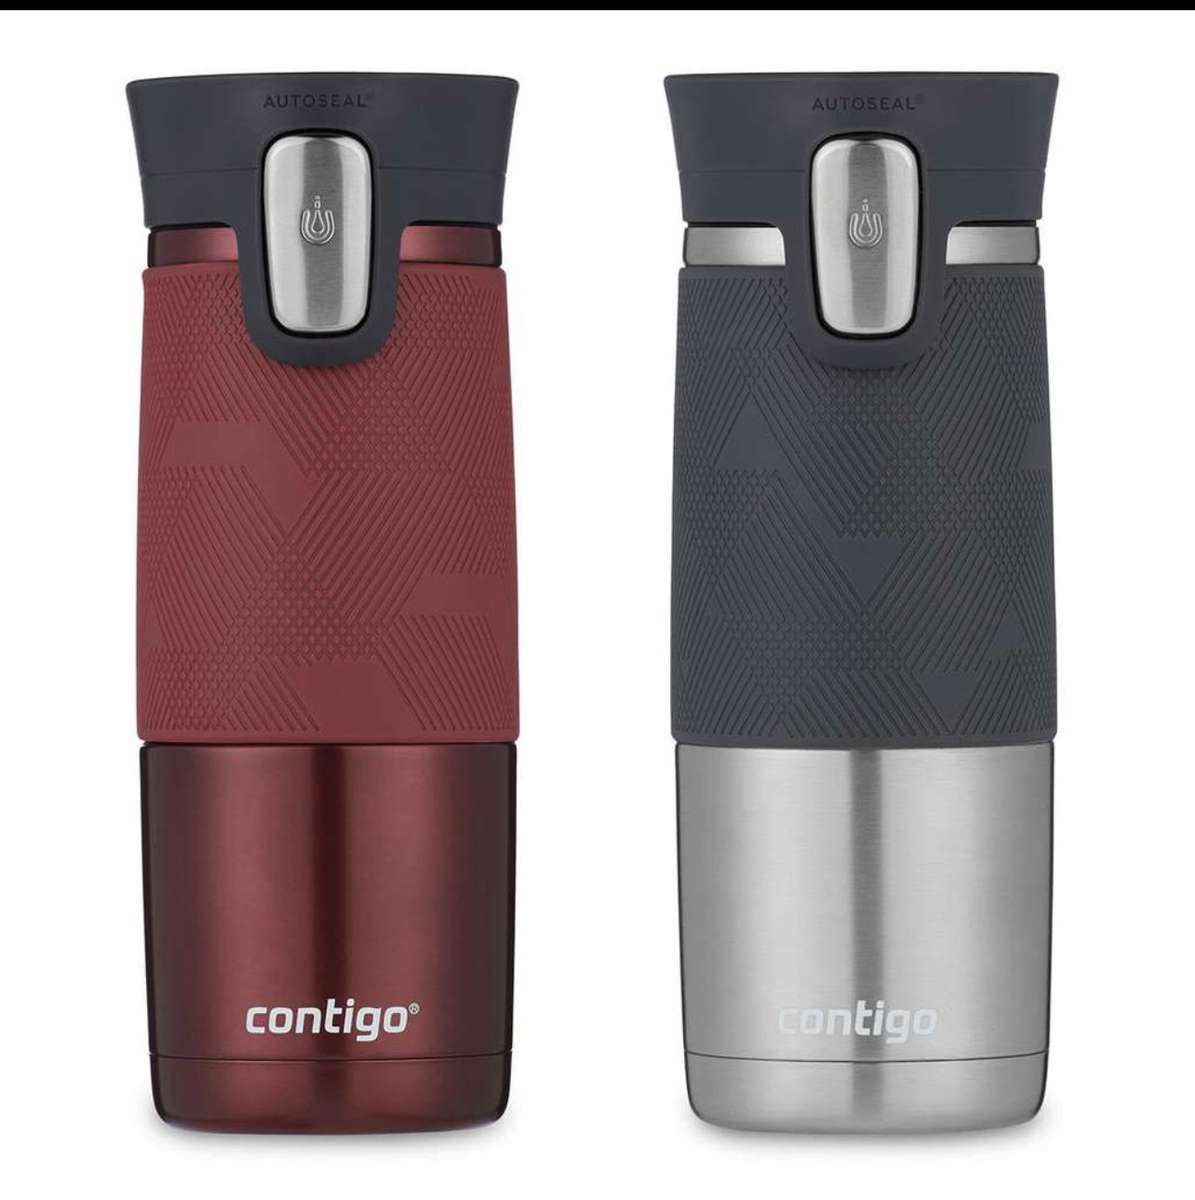 1 Red Steel CONTIGO Mug Autoseal Spill Proof Stainless Thermal Travel 473ml 